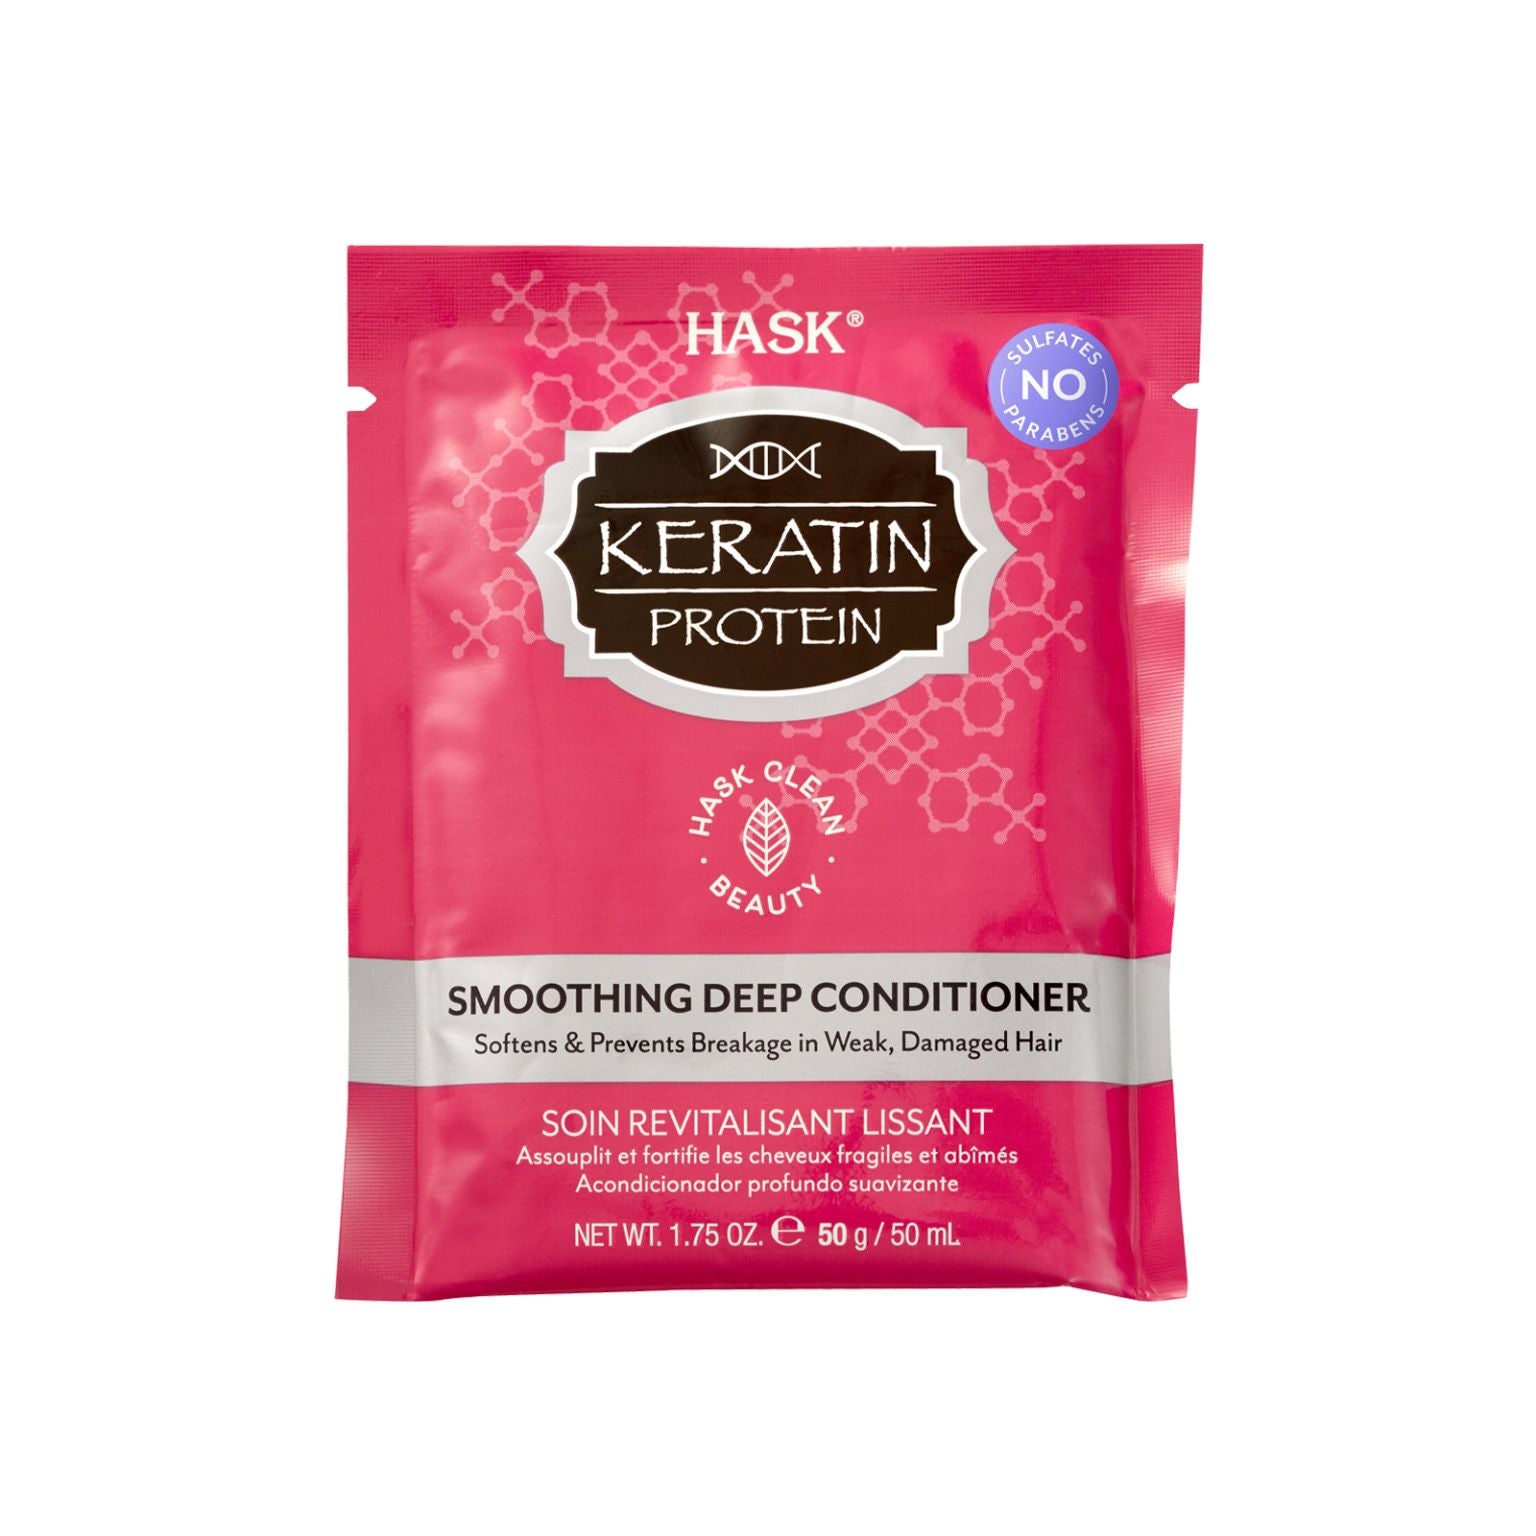 Keratin Protein Smoothing Deep Conditioning Treatment